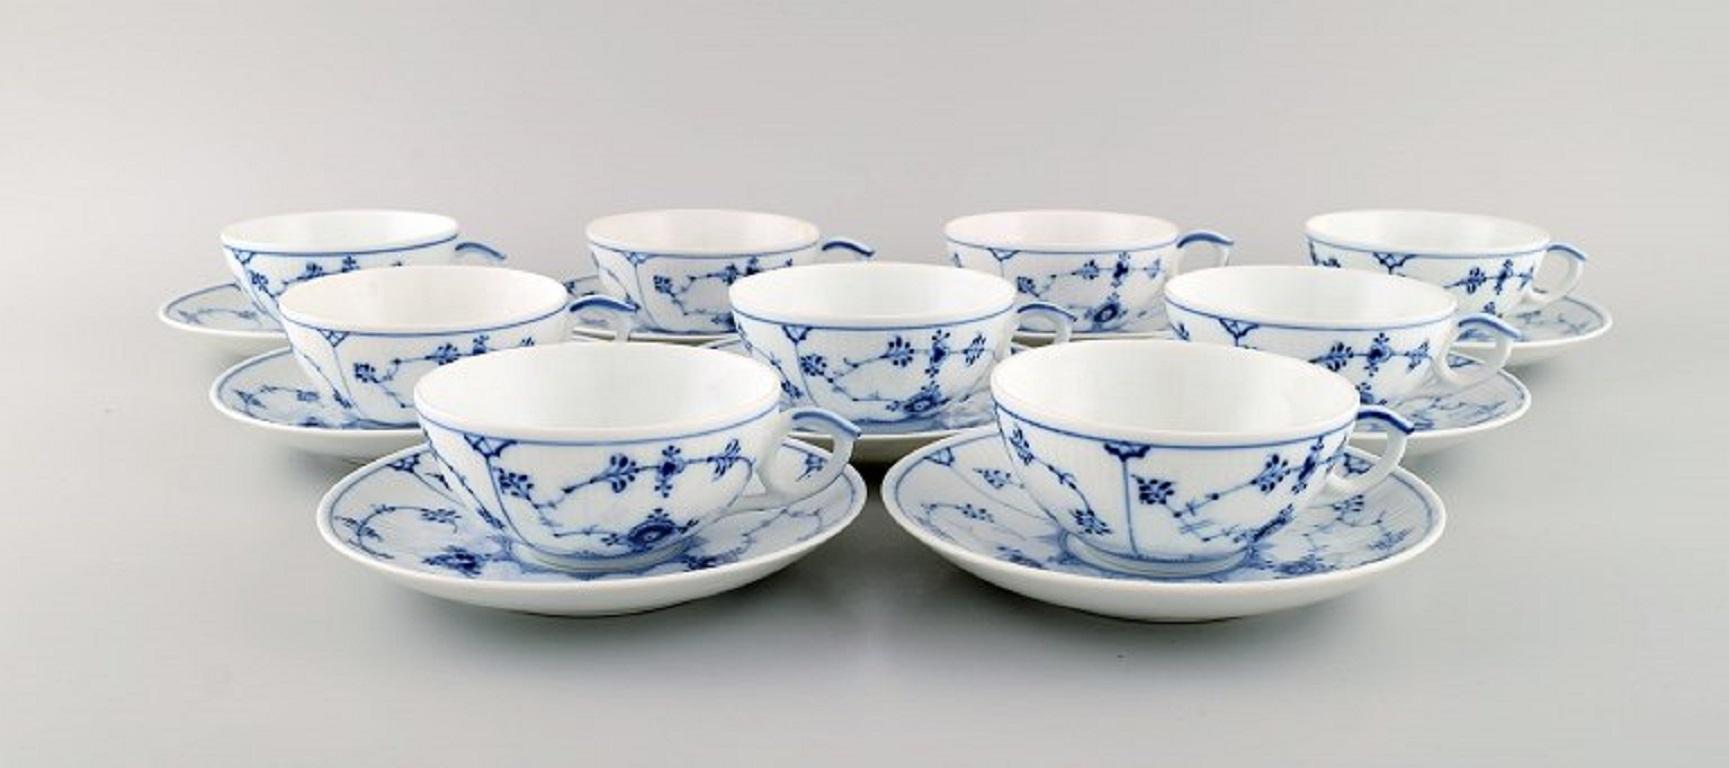 9 Royal Copenhagen Blue Fluted Plain teacups with saucers. Model number 1/76.
1920s/1930s
The cup measures: 9.5 x 4.5 cm.
Saucer diameter: 14.7 cm.
In excellent condition.
Stamped.
1st factory quality.